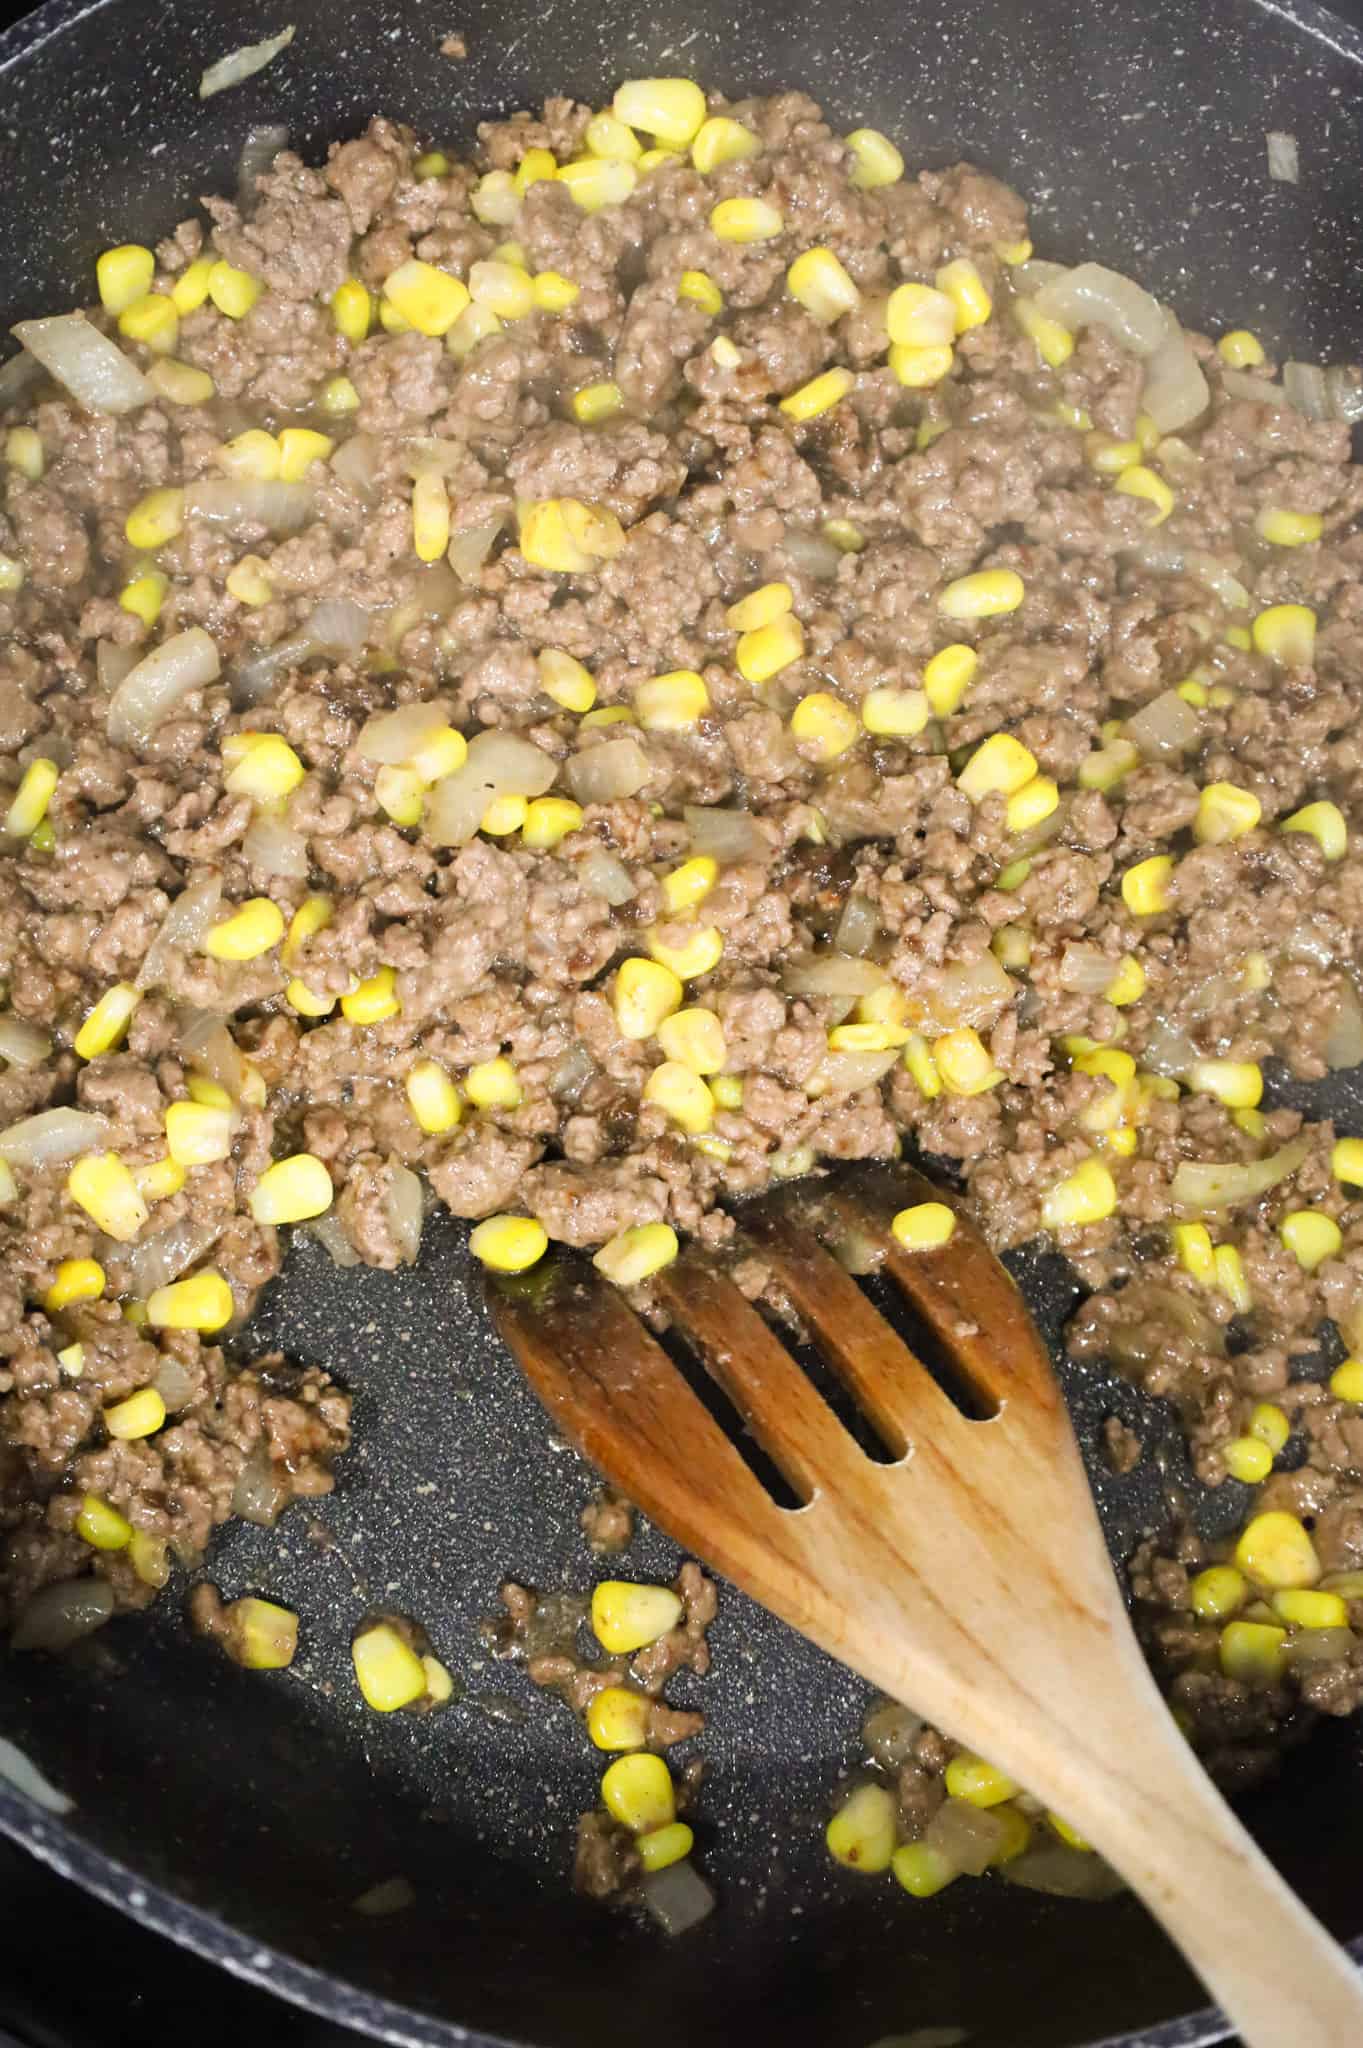 cooked ground beef and gravy mixture in a skillet